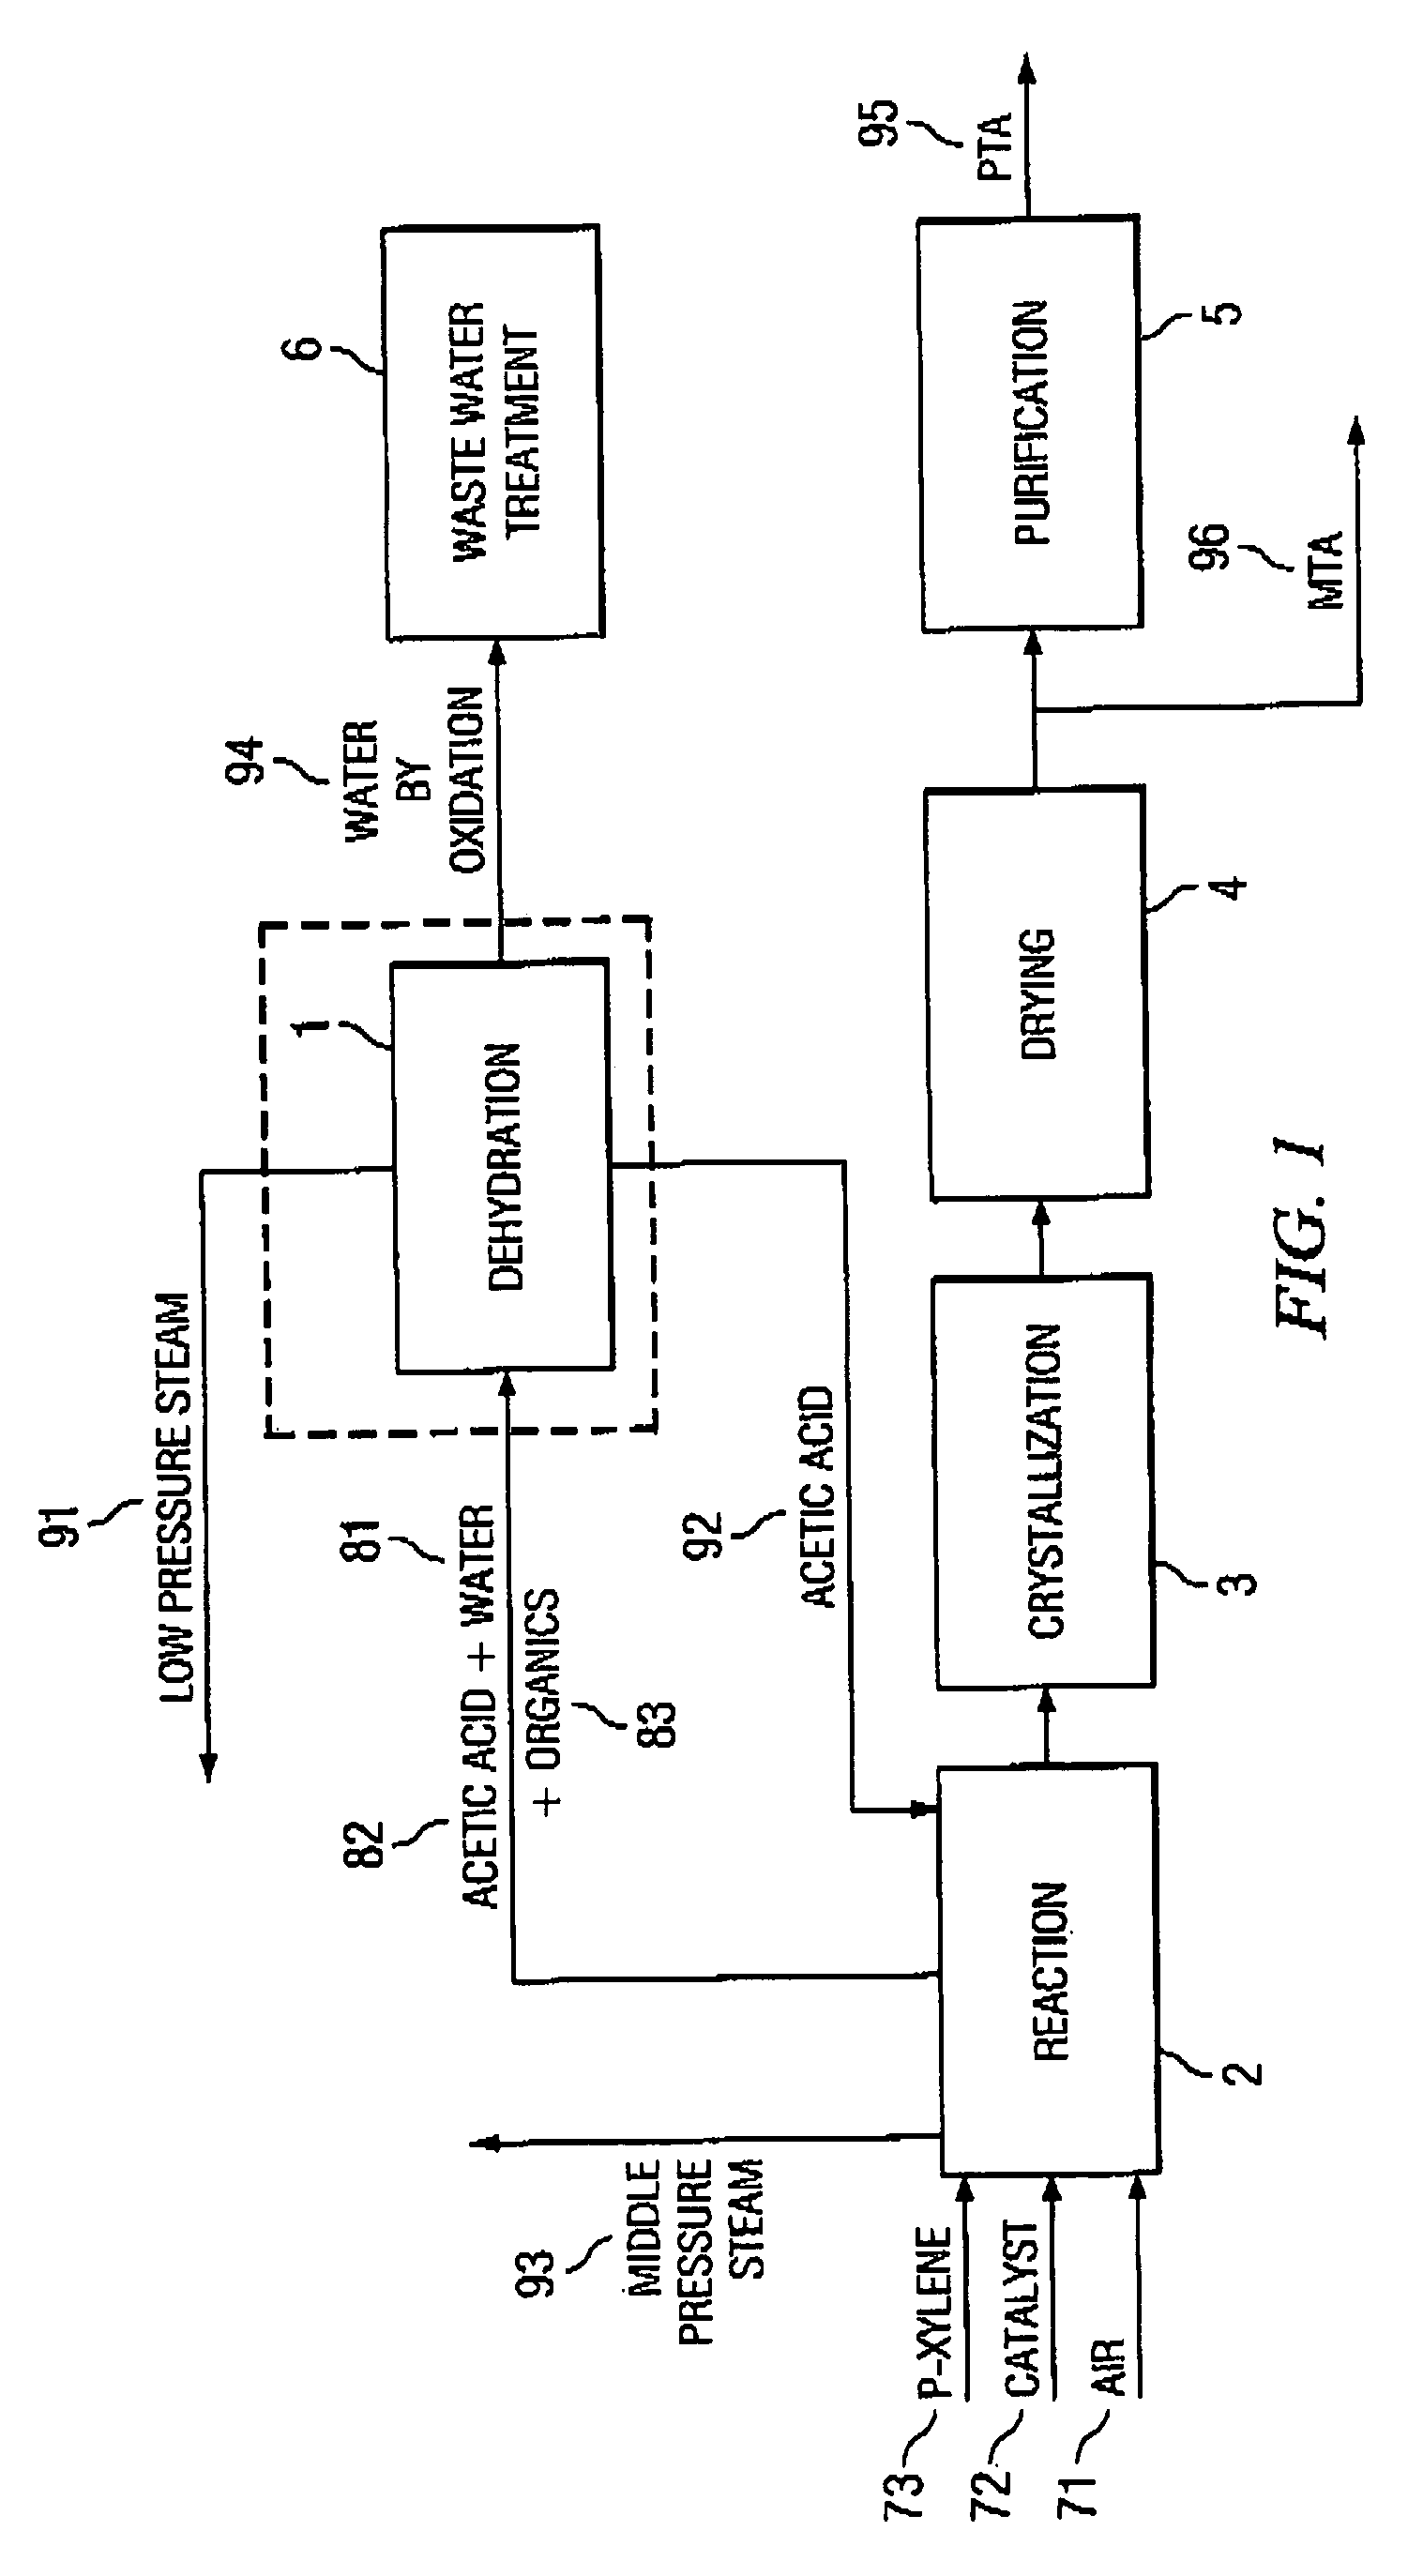 System and method for acetic acid recovery during terephthalic acid production